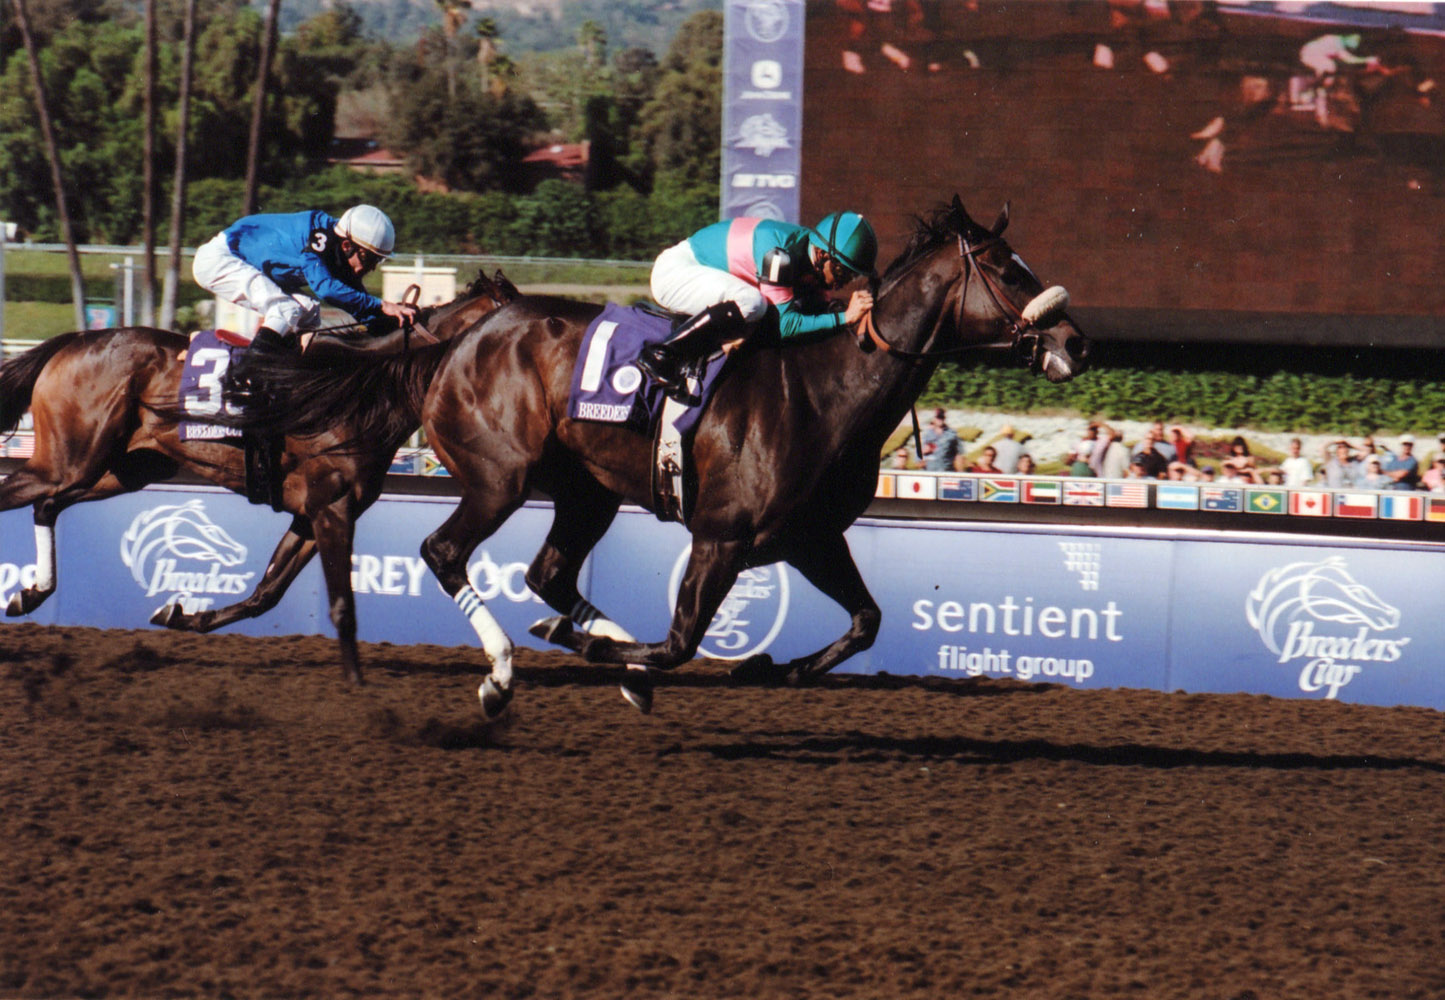 Zenyatta (Mike Smith up) winning the 2008 Breeders' Cup Ladies' Classic at Santa Anita (Bill Mochon/Museum Collection)